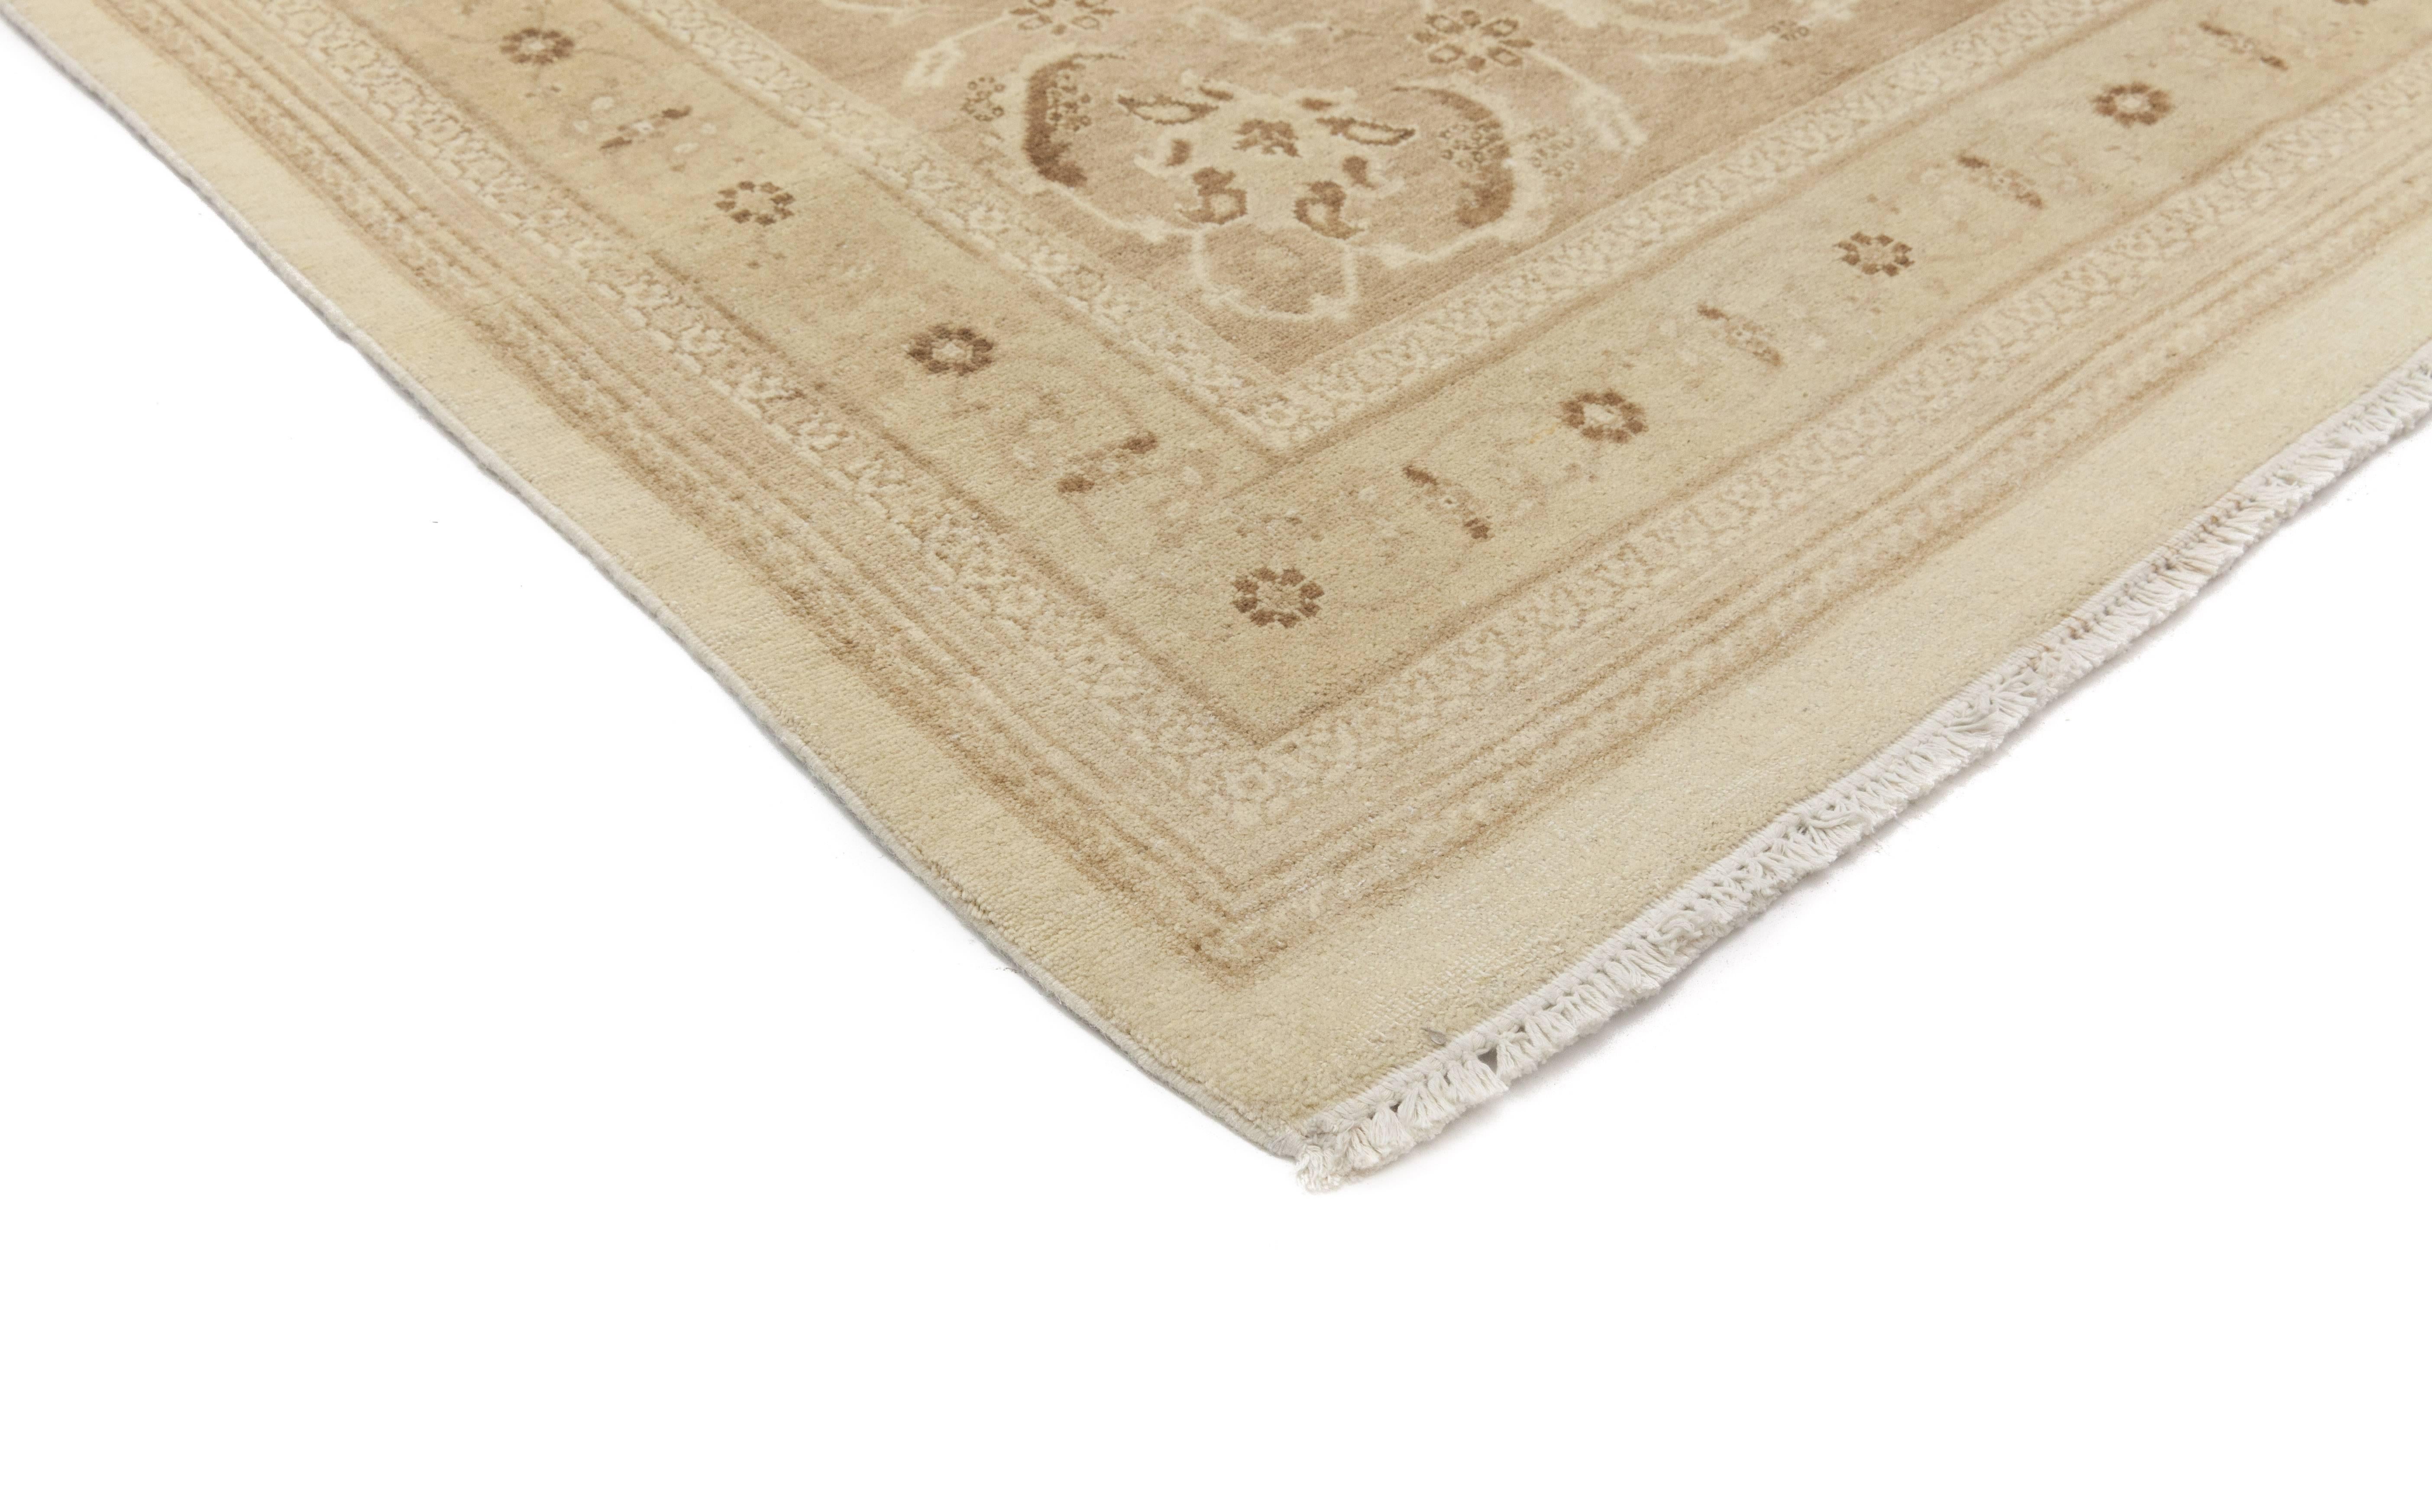 Color: Ivory - Made In: Pakistan. 100% Wool. Originating centuries ago in what is now Turkey, Oushak rugs have long been sought after for their intricate patterns, lush yet subtle colors, and soft luster. These rugs continue that tradition.